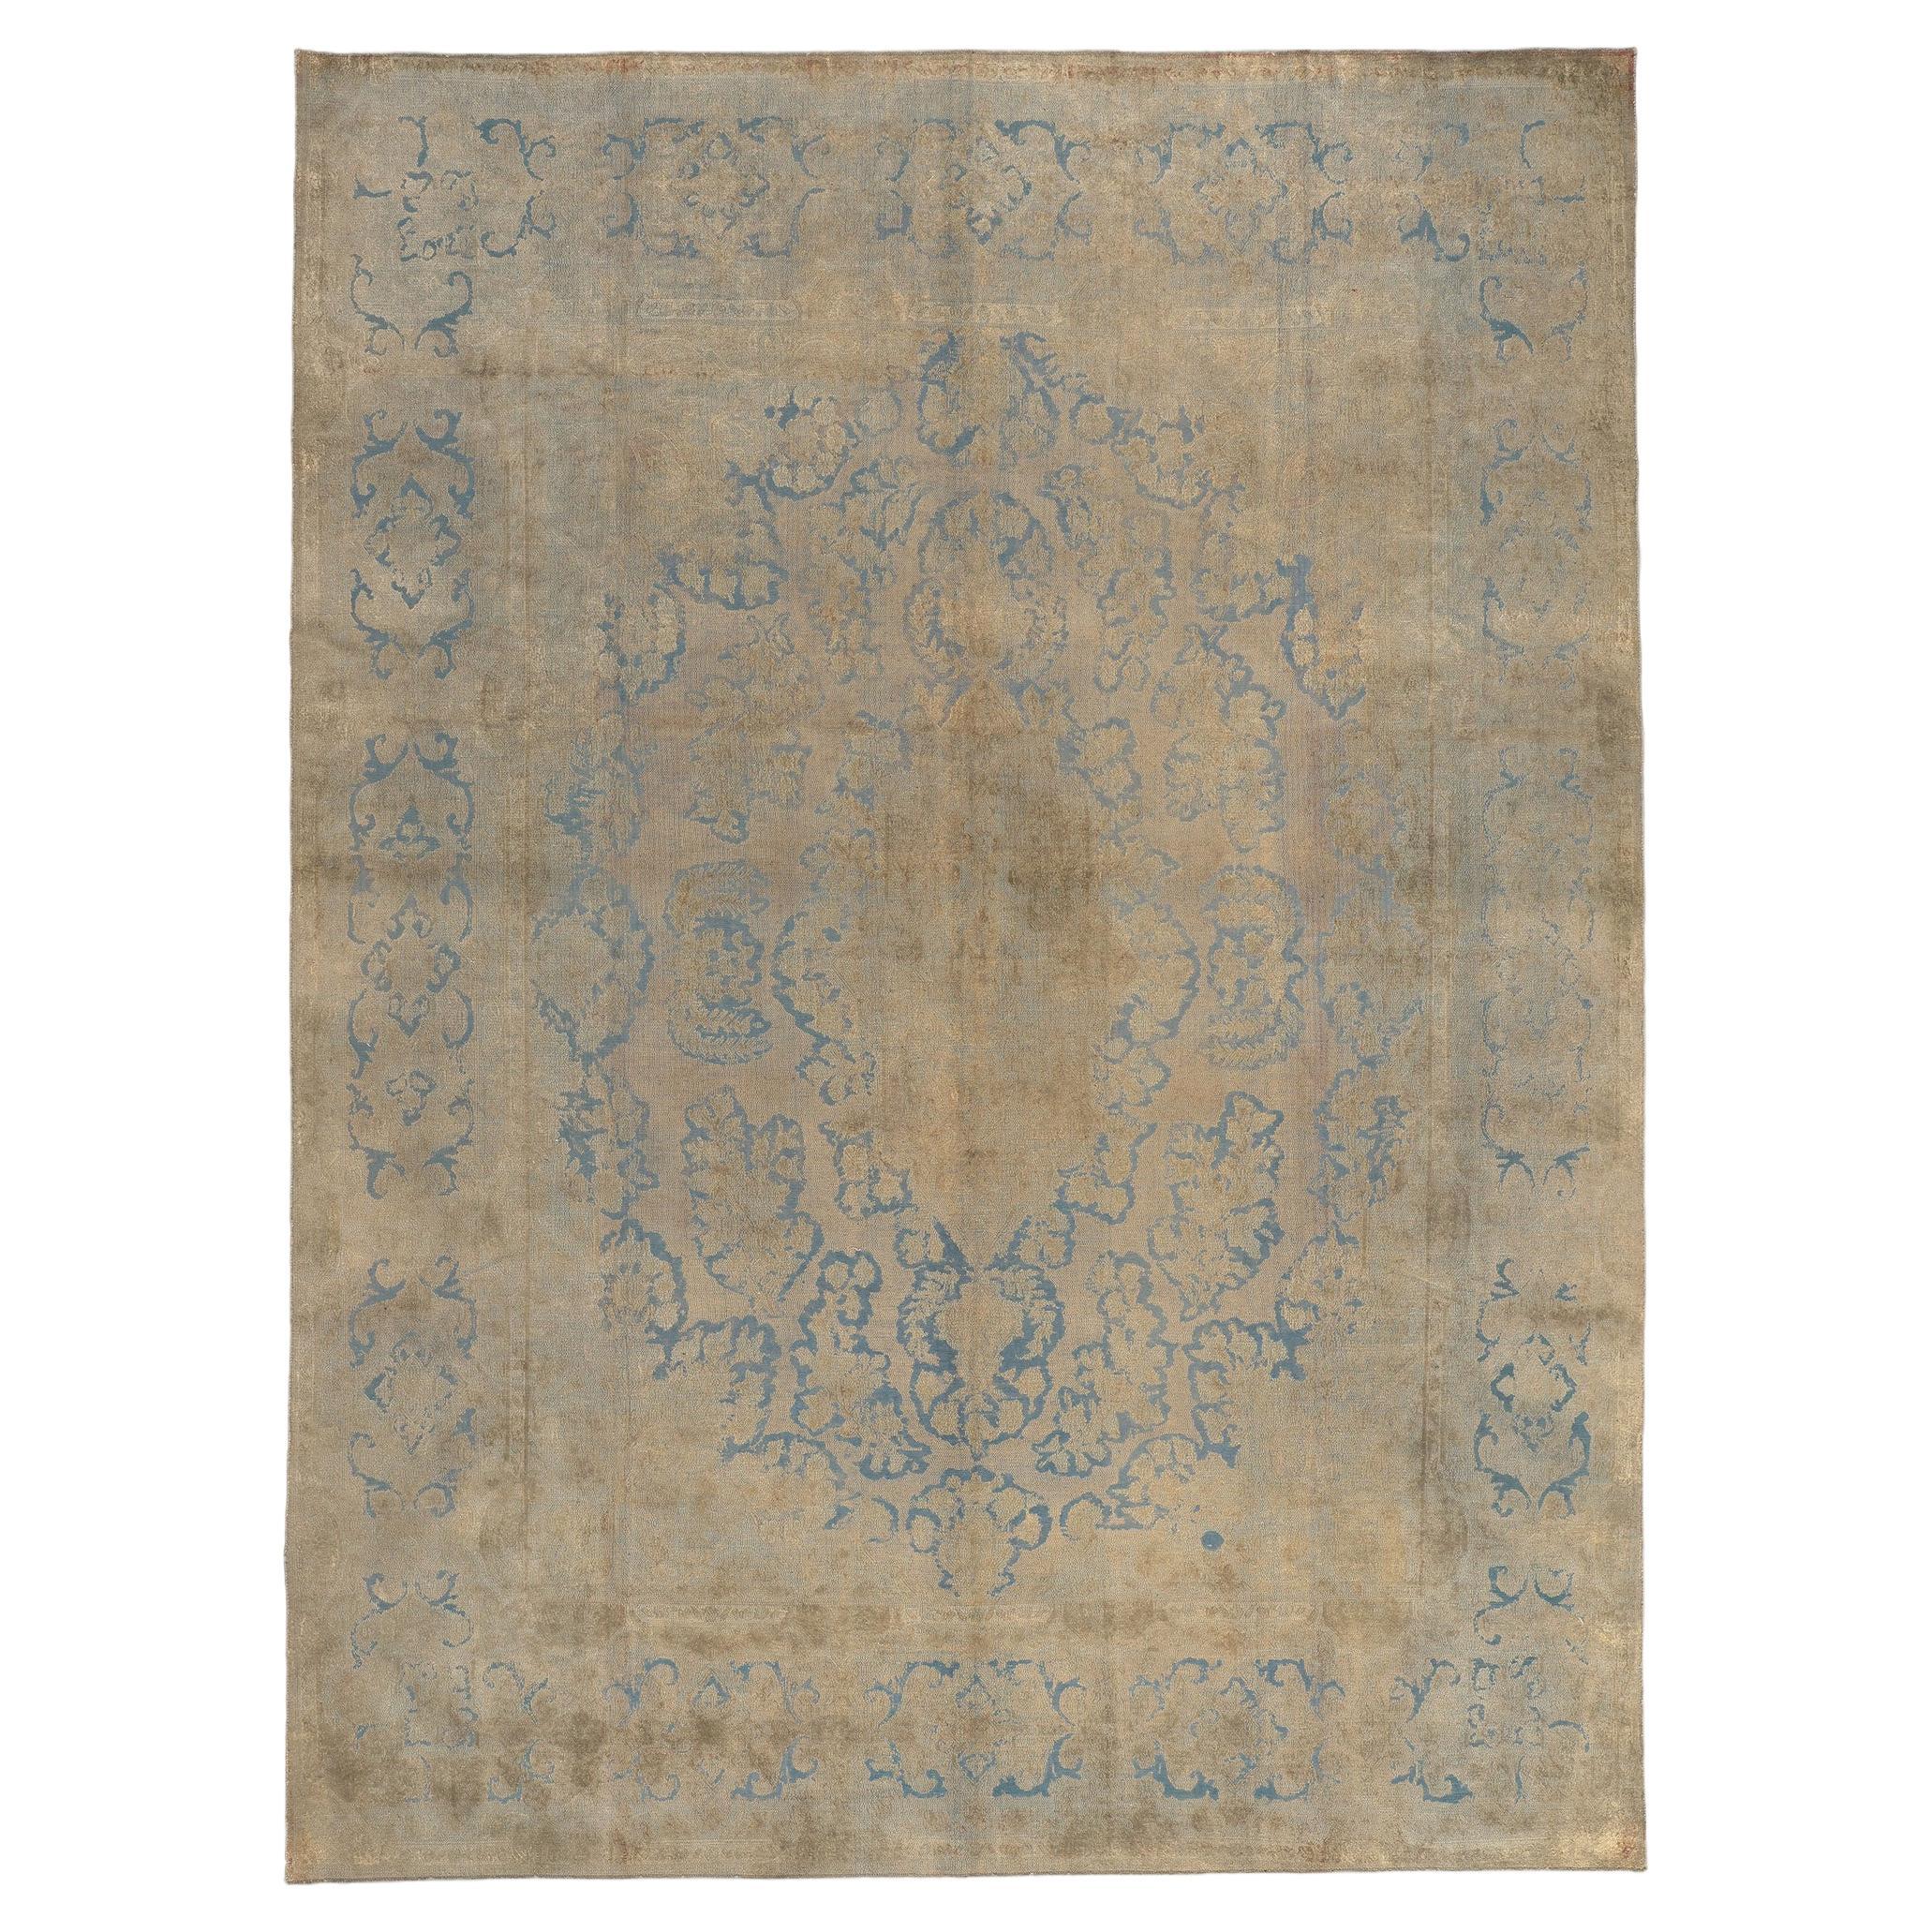 Vintage Turkish Overdyed Rug, Industrial Chic Meets French Country Elegance